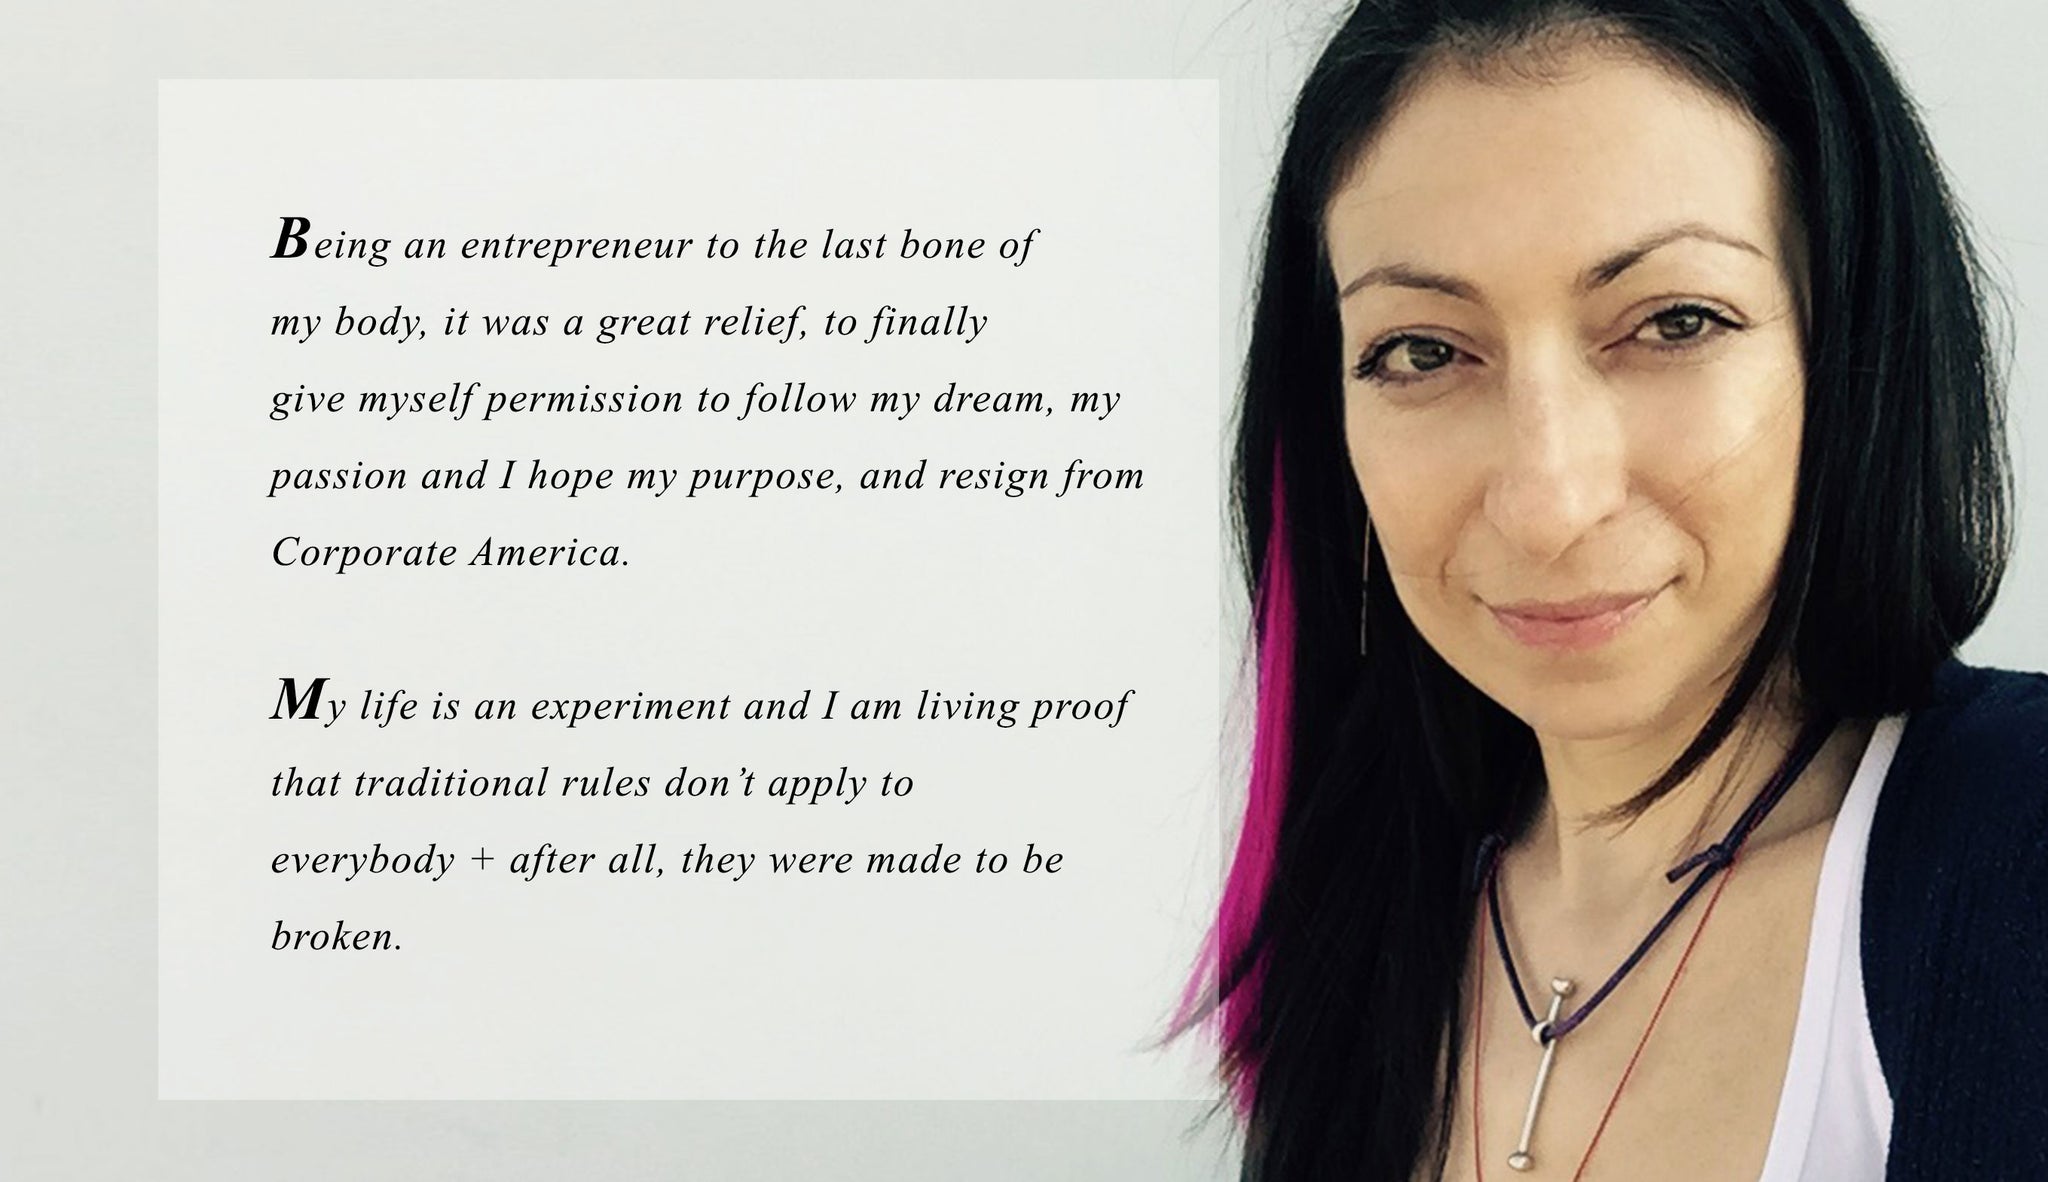 Being an entrepreneur to the last bone of  my body, it was a great relief, to finally  give myself permission to follow my dream, my passion and I hope my purpose, and resign from Corporate America.   My life is an experiment and I am living proof that traditional rules don’t apply to  everybody + after all, they were made to be broken.